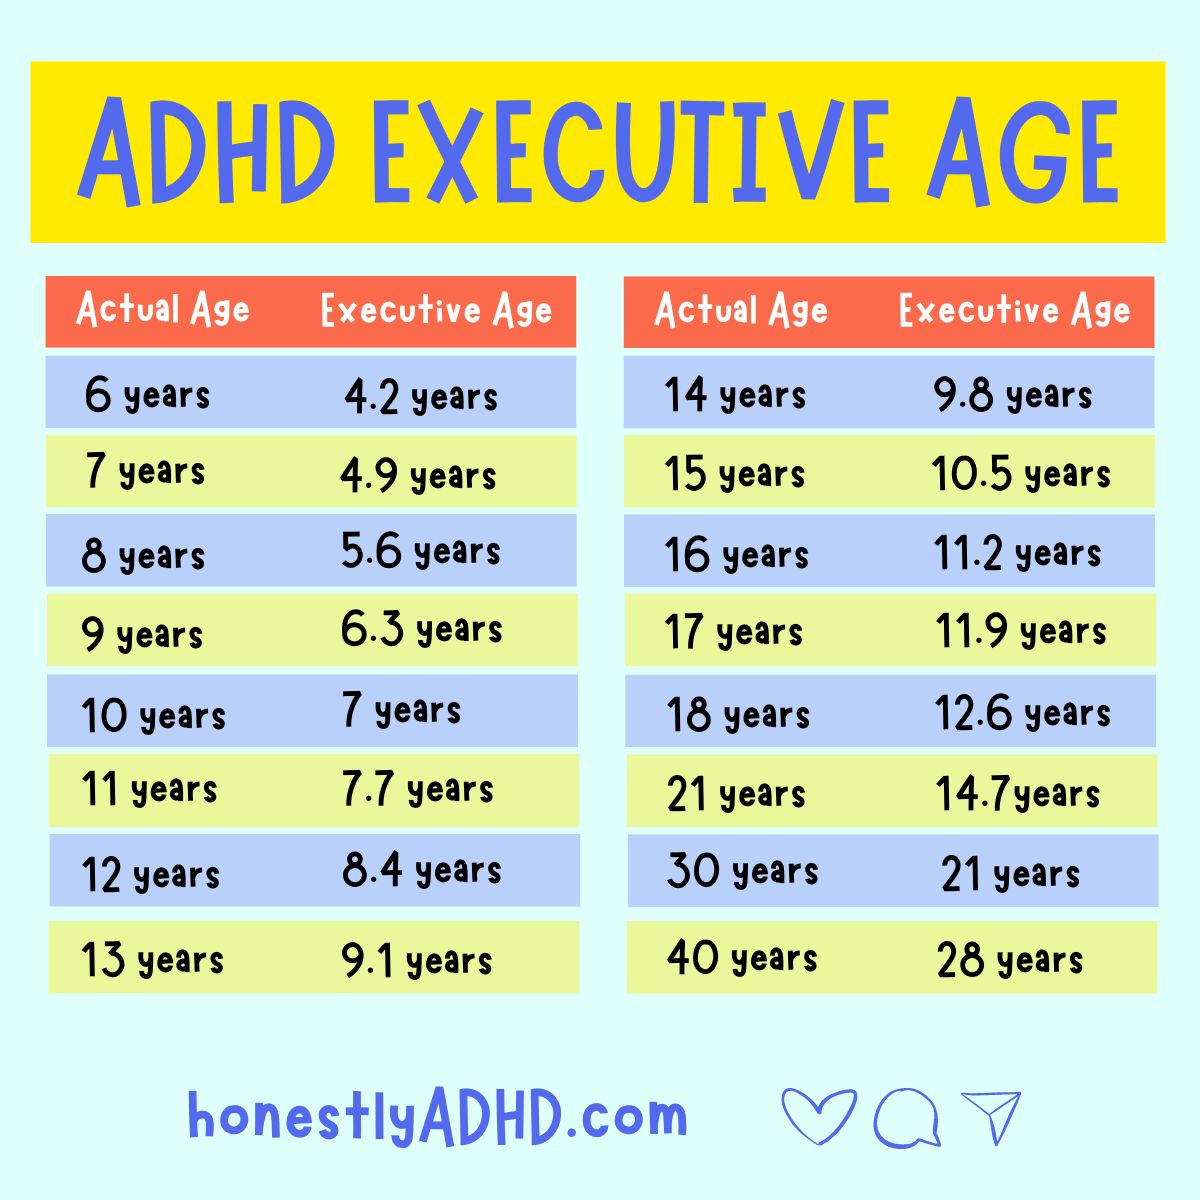 An ADHD maturity chart showing the mental age (executive age) of people with ADHD vs. their actual age.